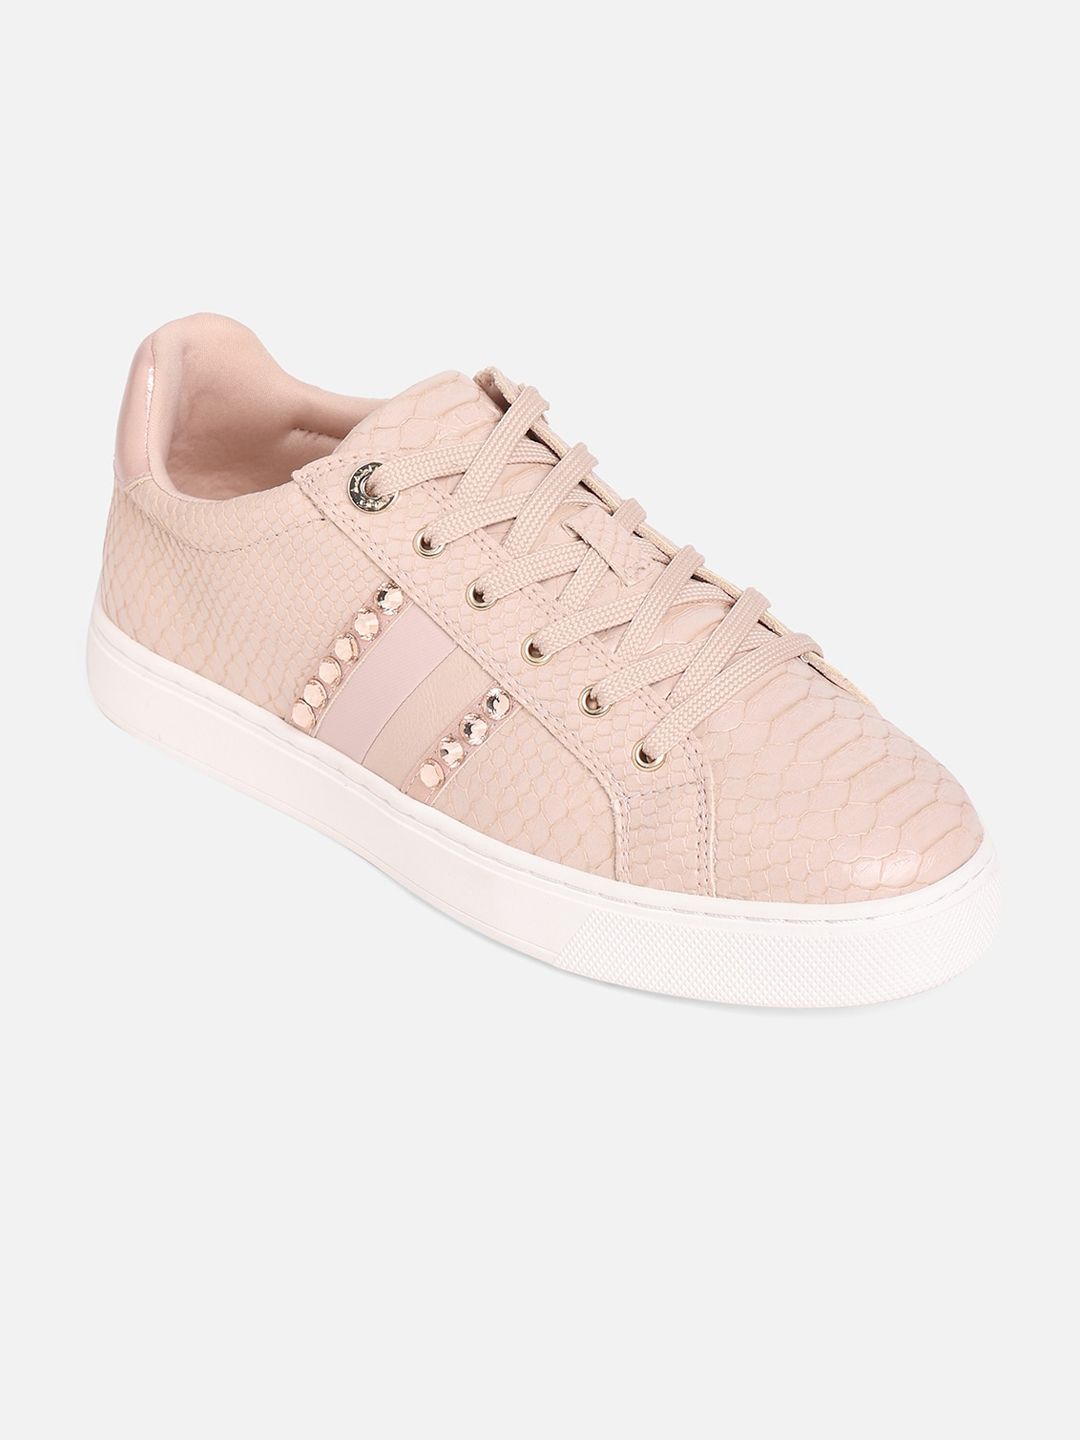 ALDO Women Pink Textured Lace-up Sneakers Price in India